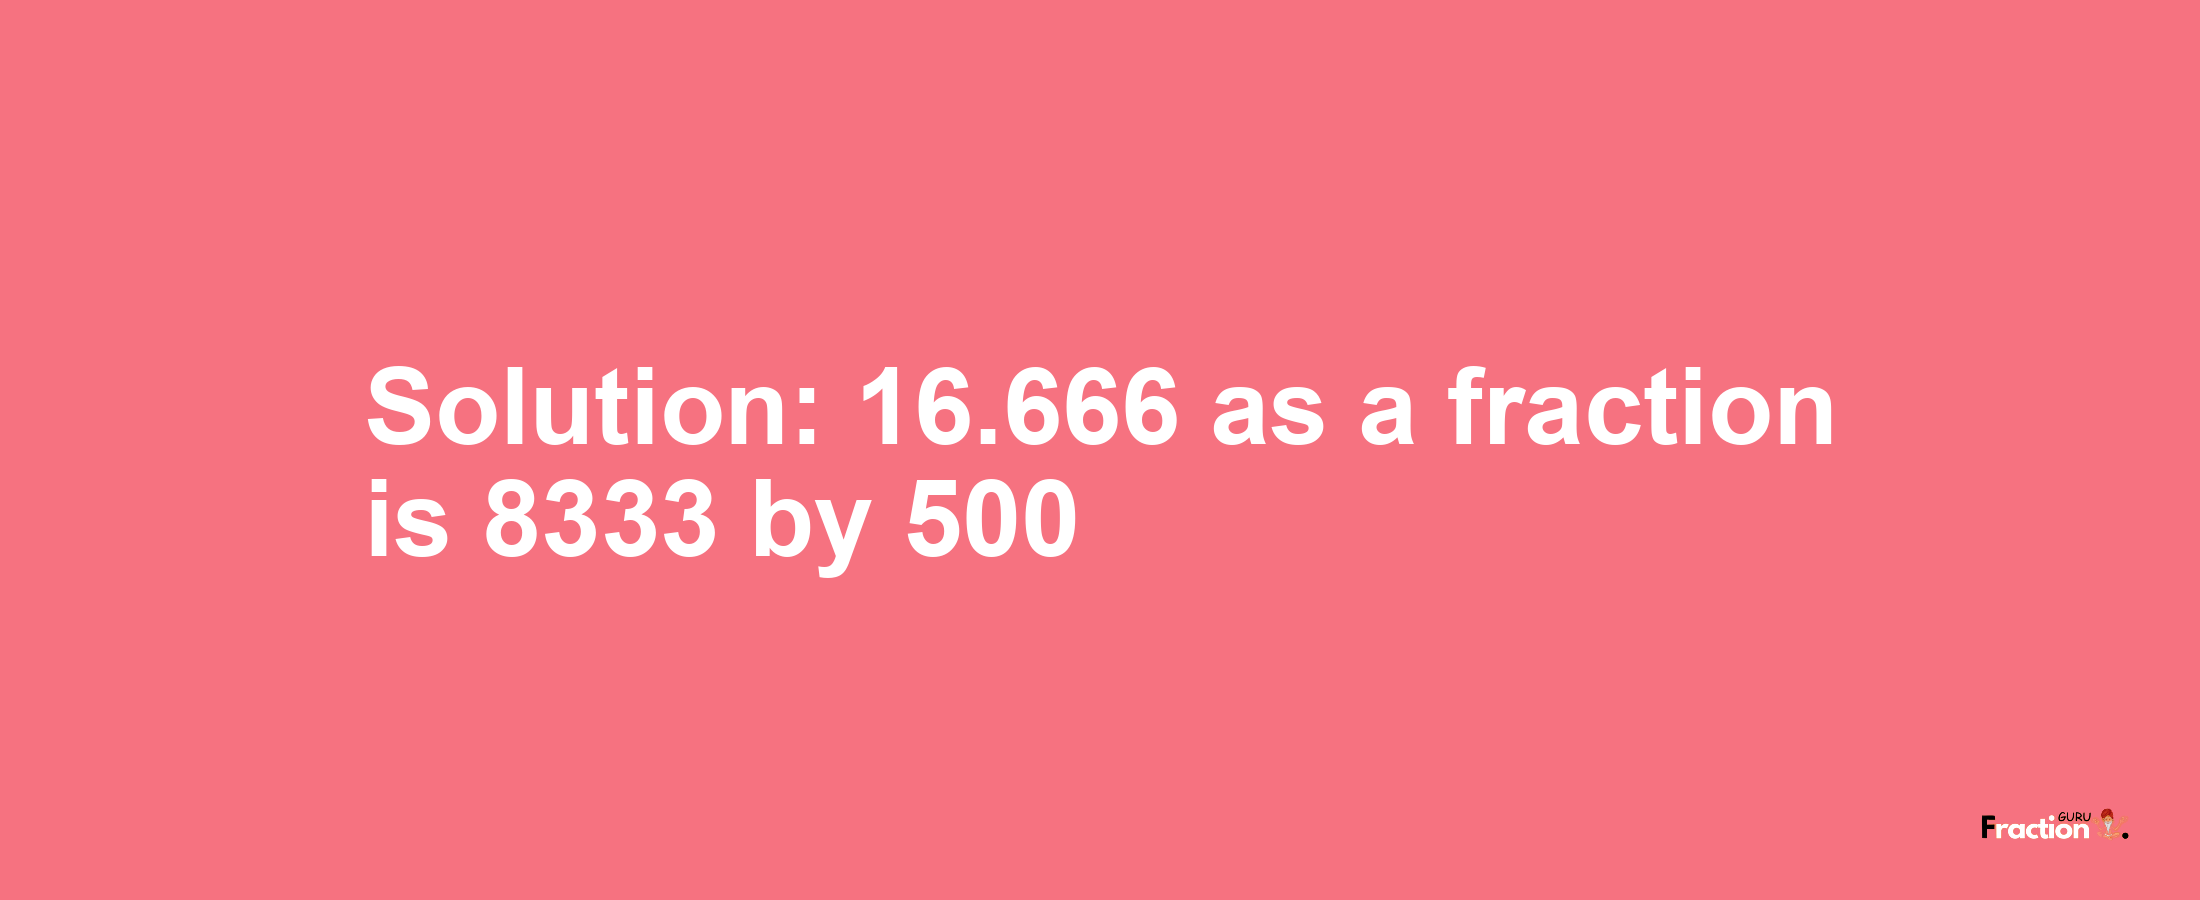 Solution:16.666 as a fraction is 8333/500